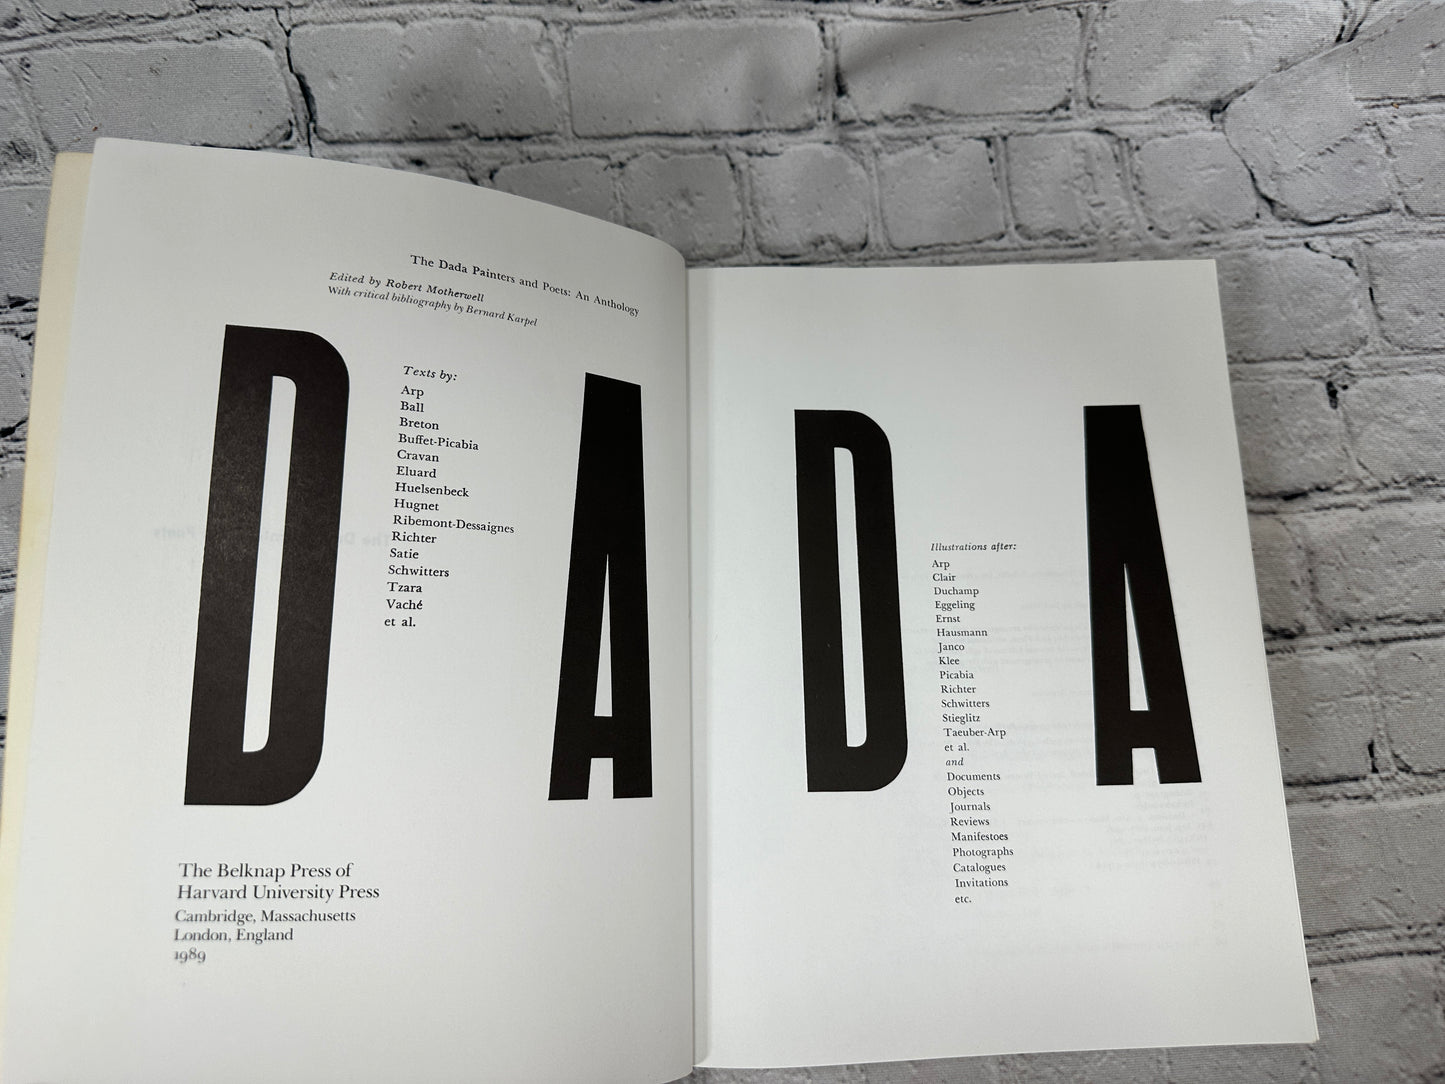 The Dada Painters and Poets An Anthology by Robert Motherwell [1989 · Second Ed]